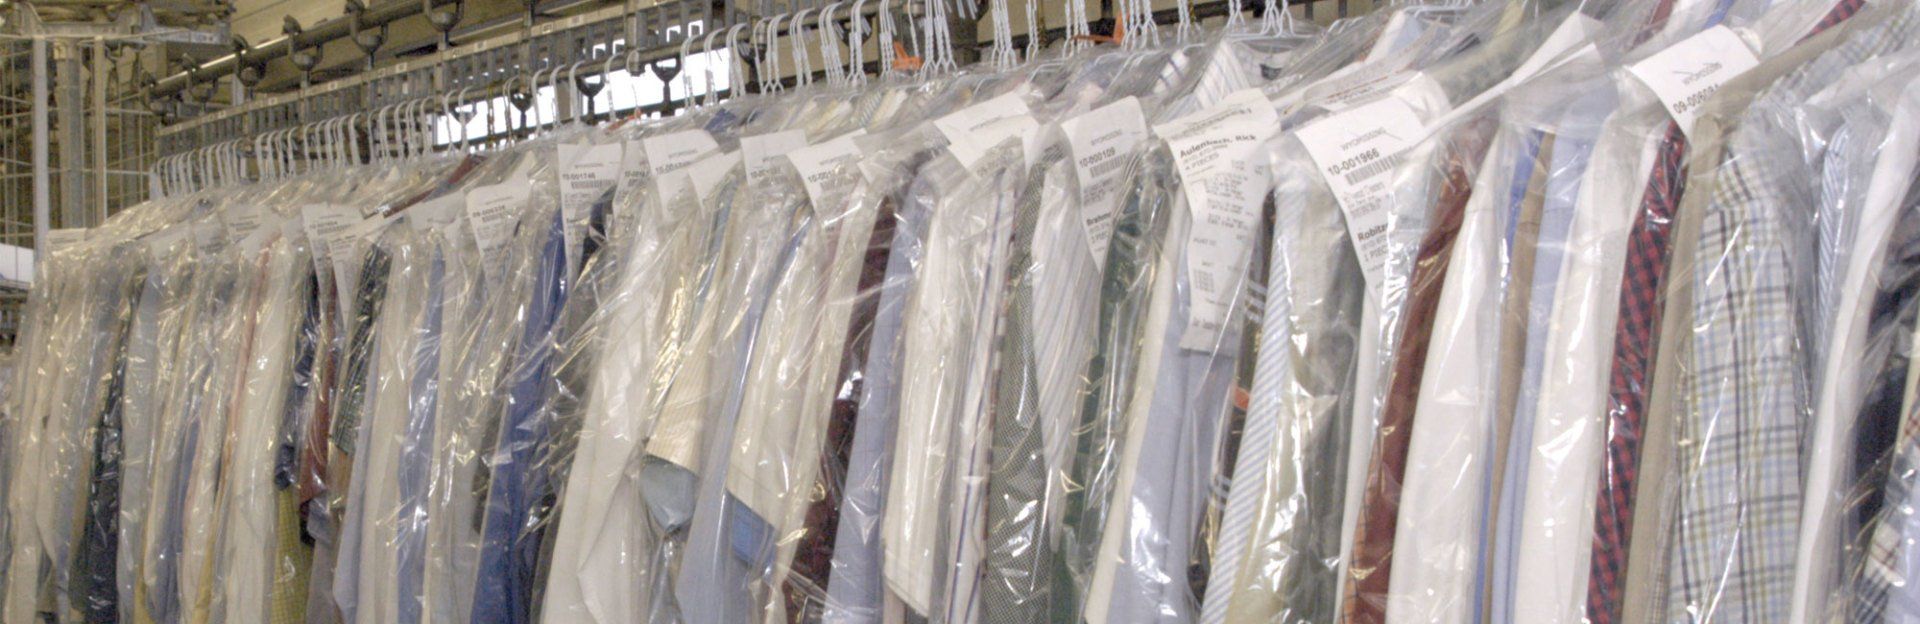 Dry-Cleaning Services